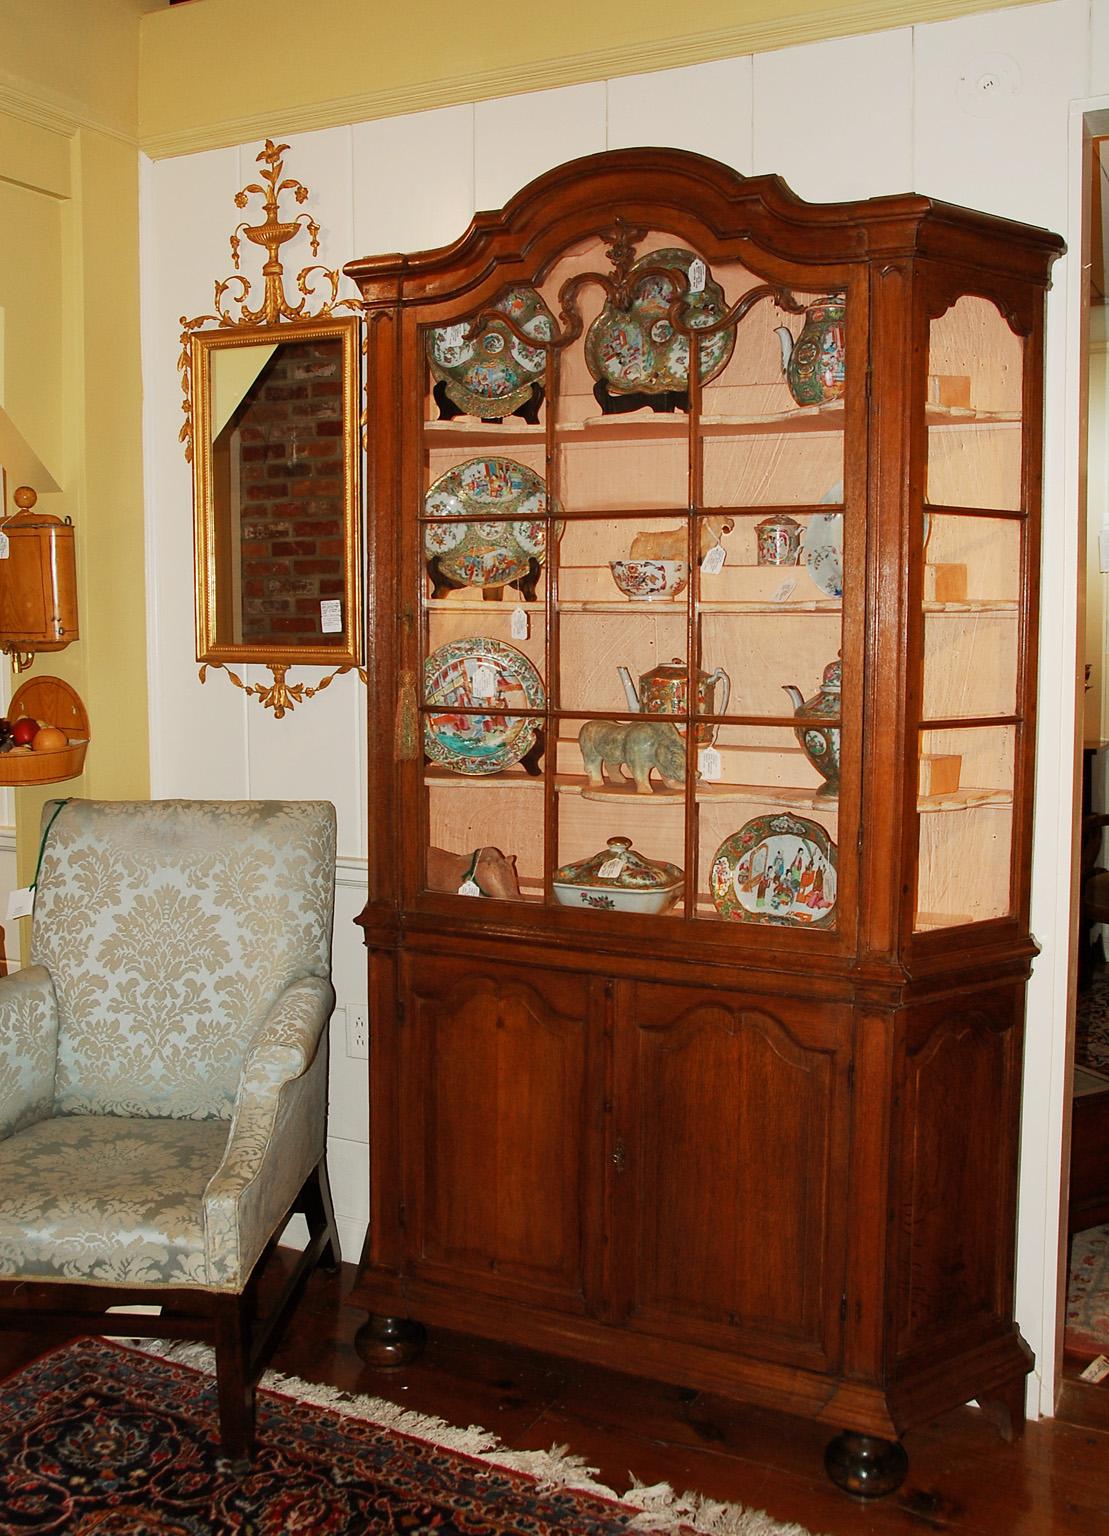 Dutch oak glazed top, two part display cabinet with bold moldings, astragal glazed glass panes surmounted by carved leaf moldings extending into the top cresting frame of the shaped central door. The lower part of the cabinet is enclosed by four